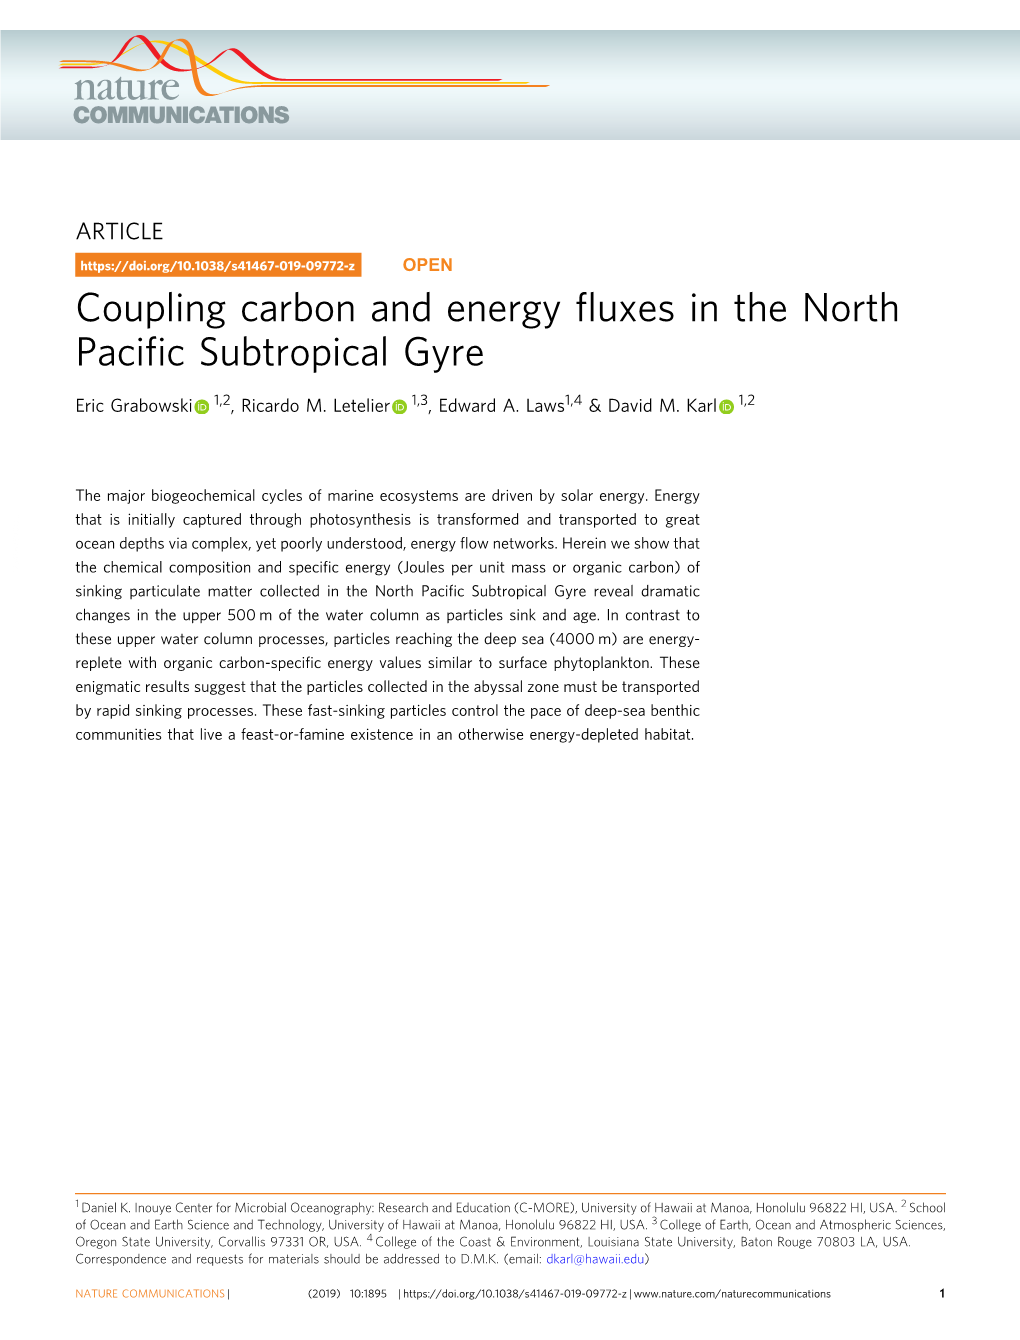 Coupling Carbon and Energy Fluxes in the North Pacific Subtropical Gyre